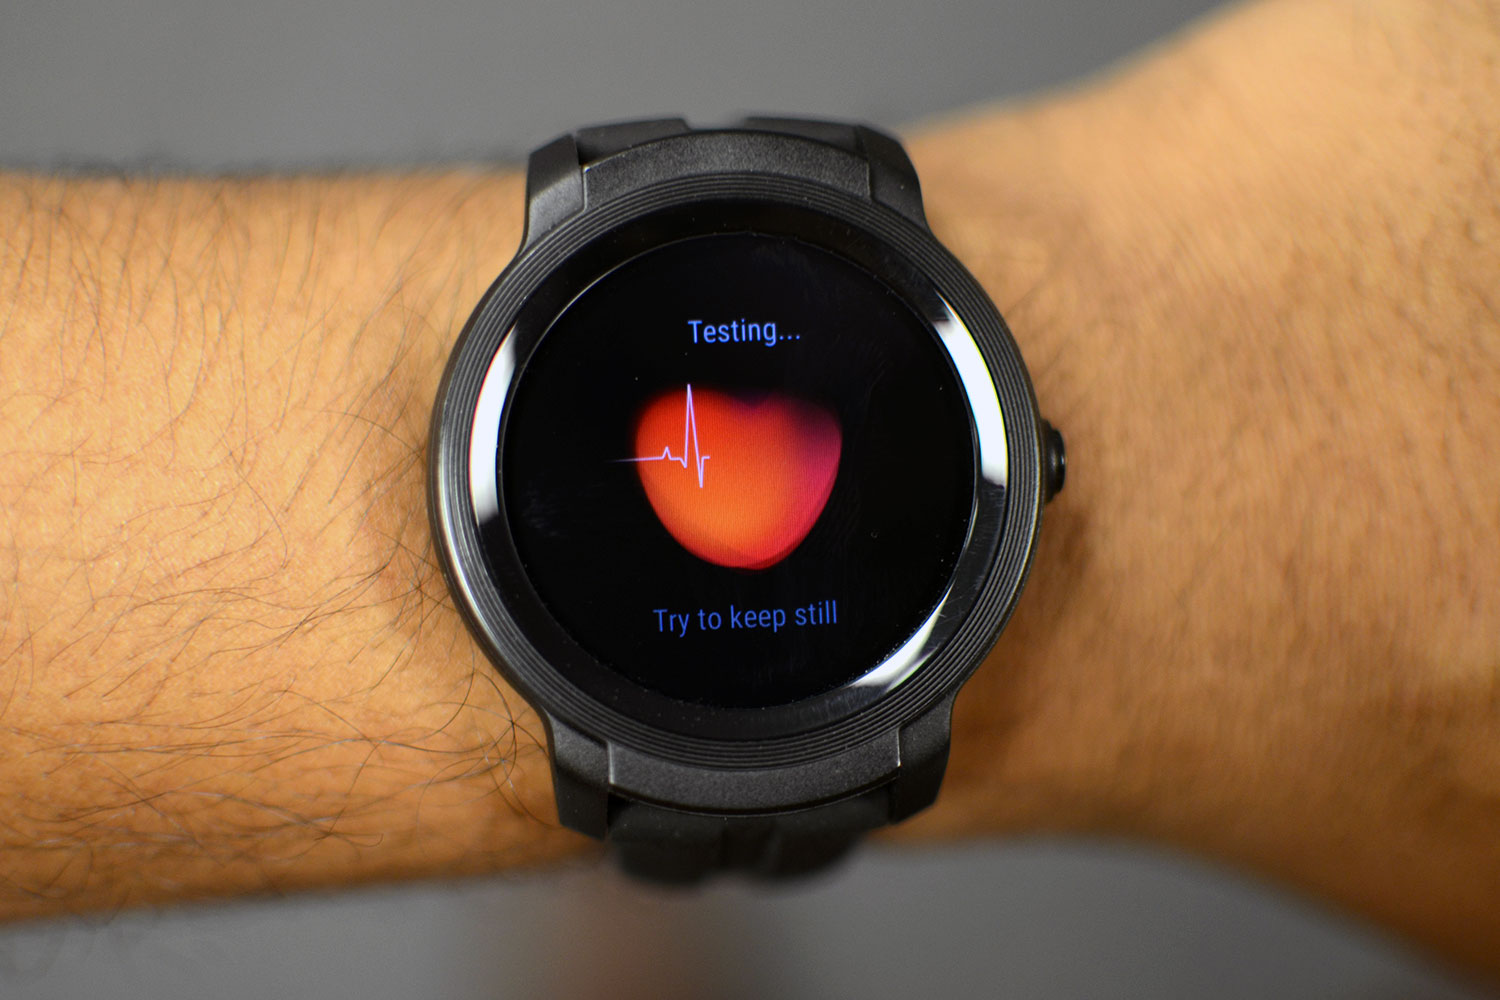 The Cheapest Wear OS Smartwatch 10 Months Later: Ticwatch E2 Review and  Test 